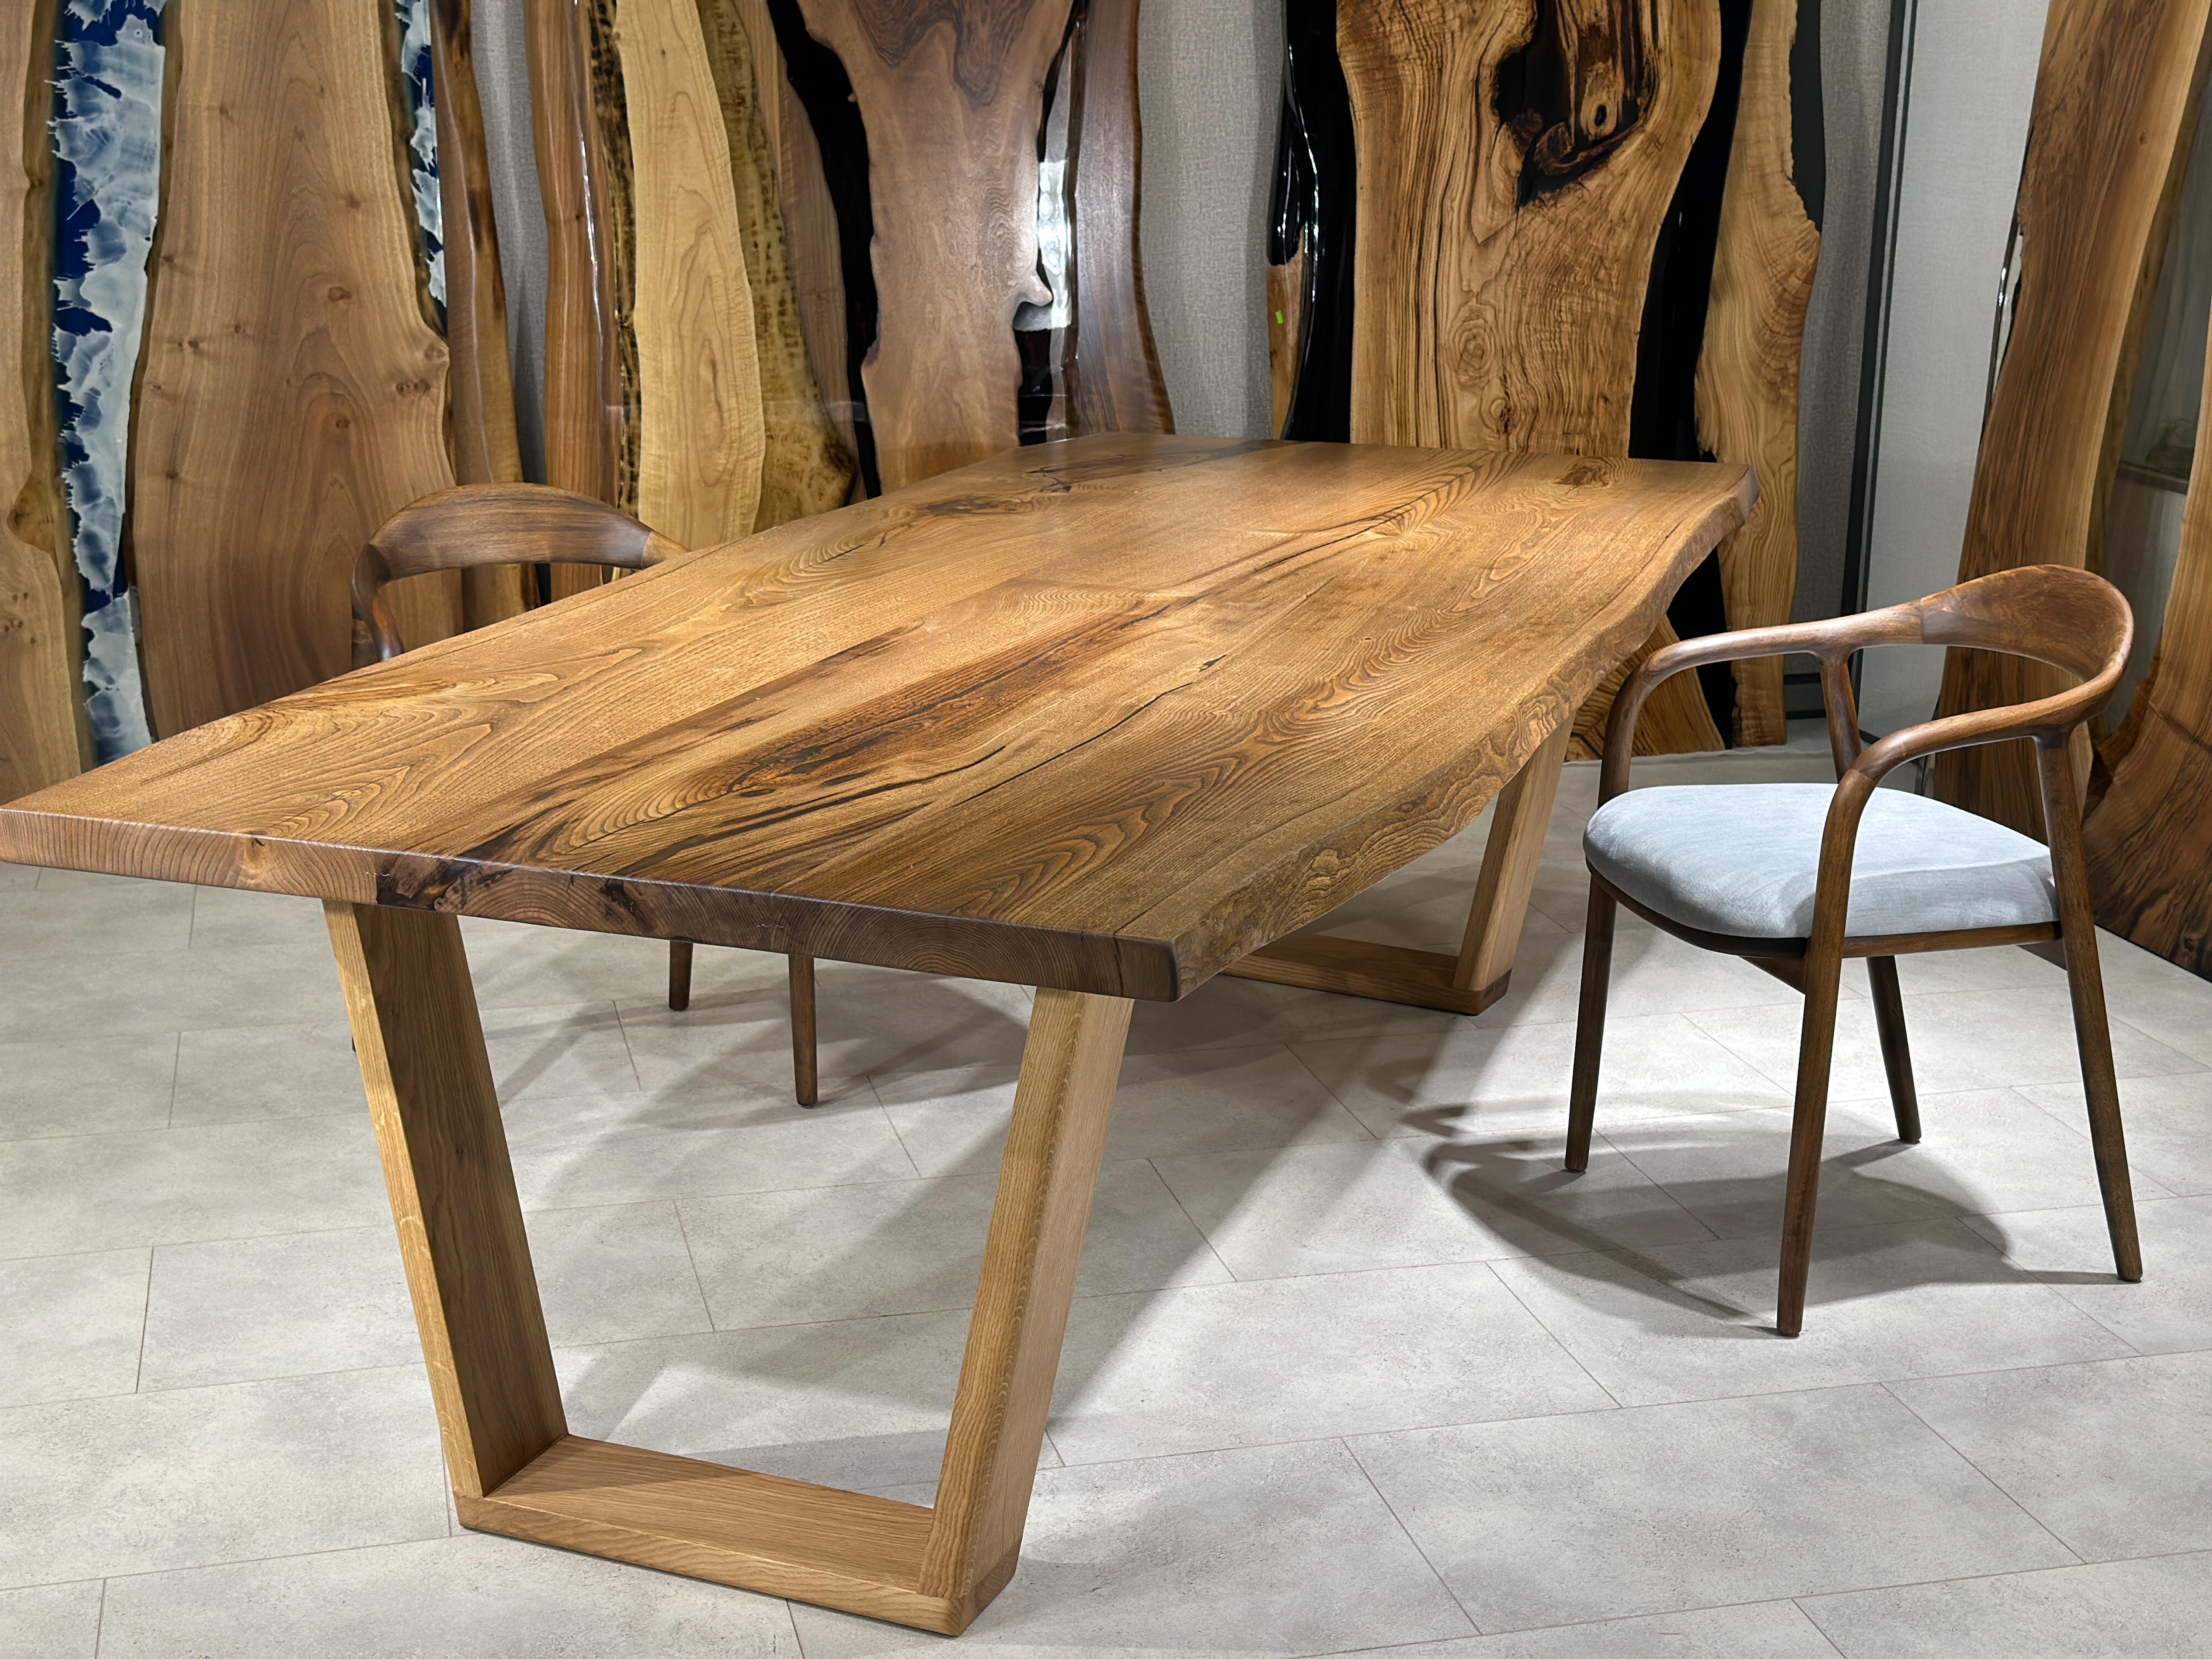 Turkish Chestnut Solid Wood Live Edge Custom Dining Kitchen Table For Sale